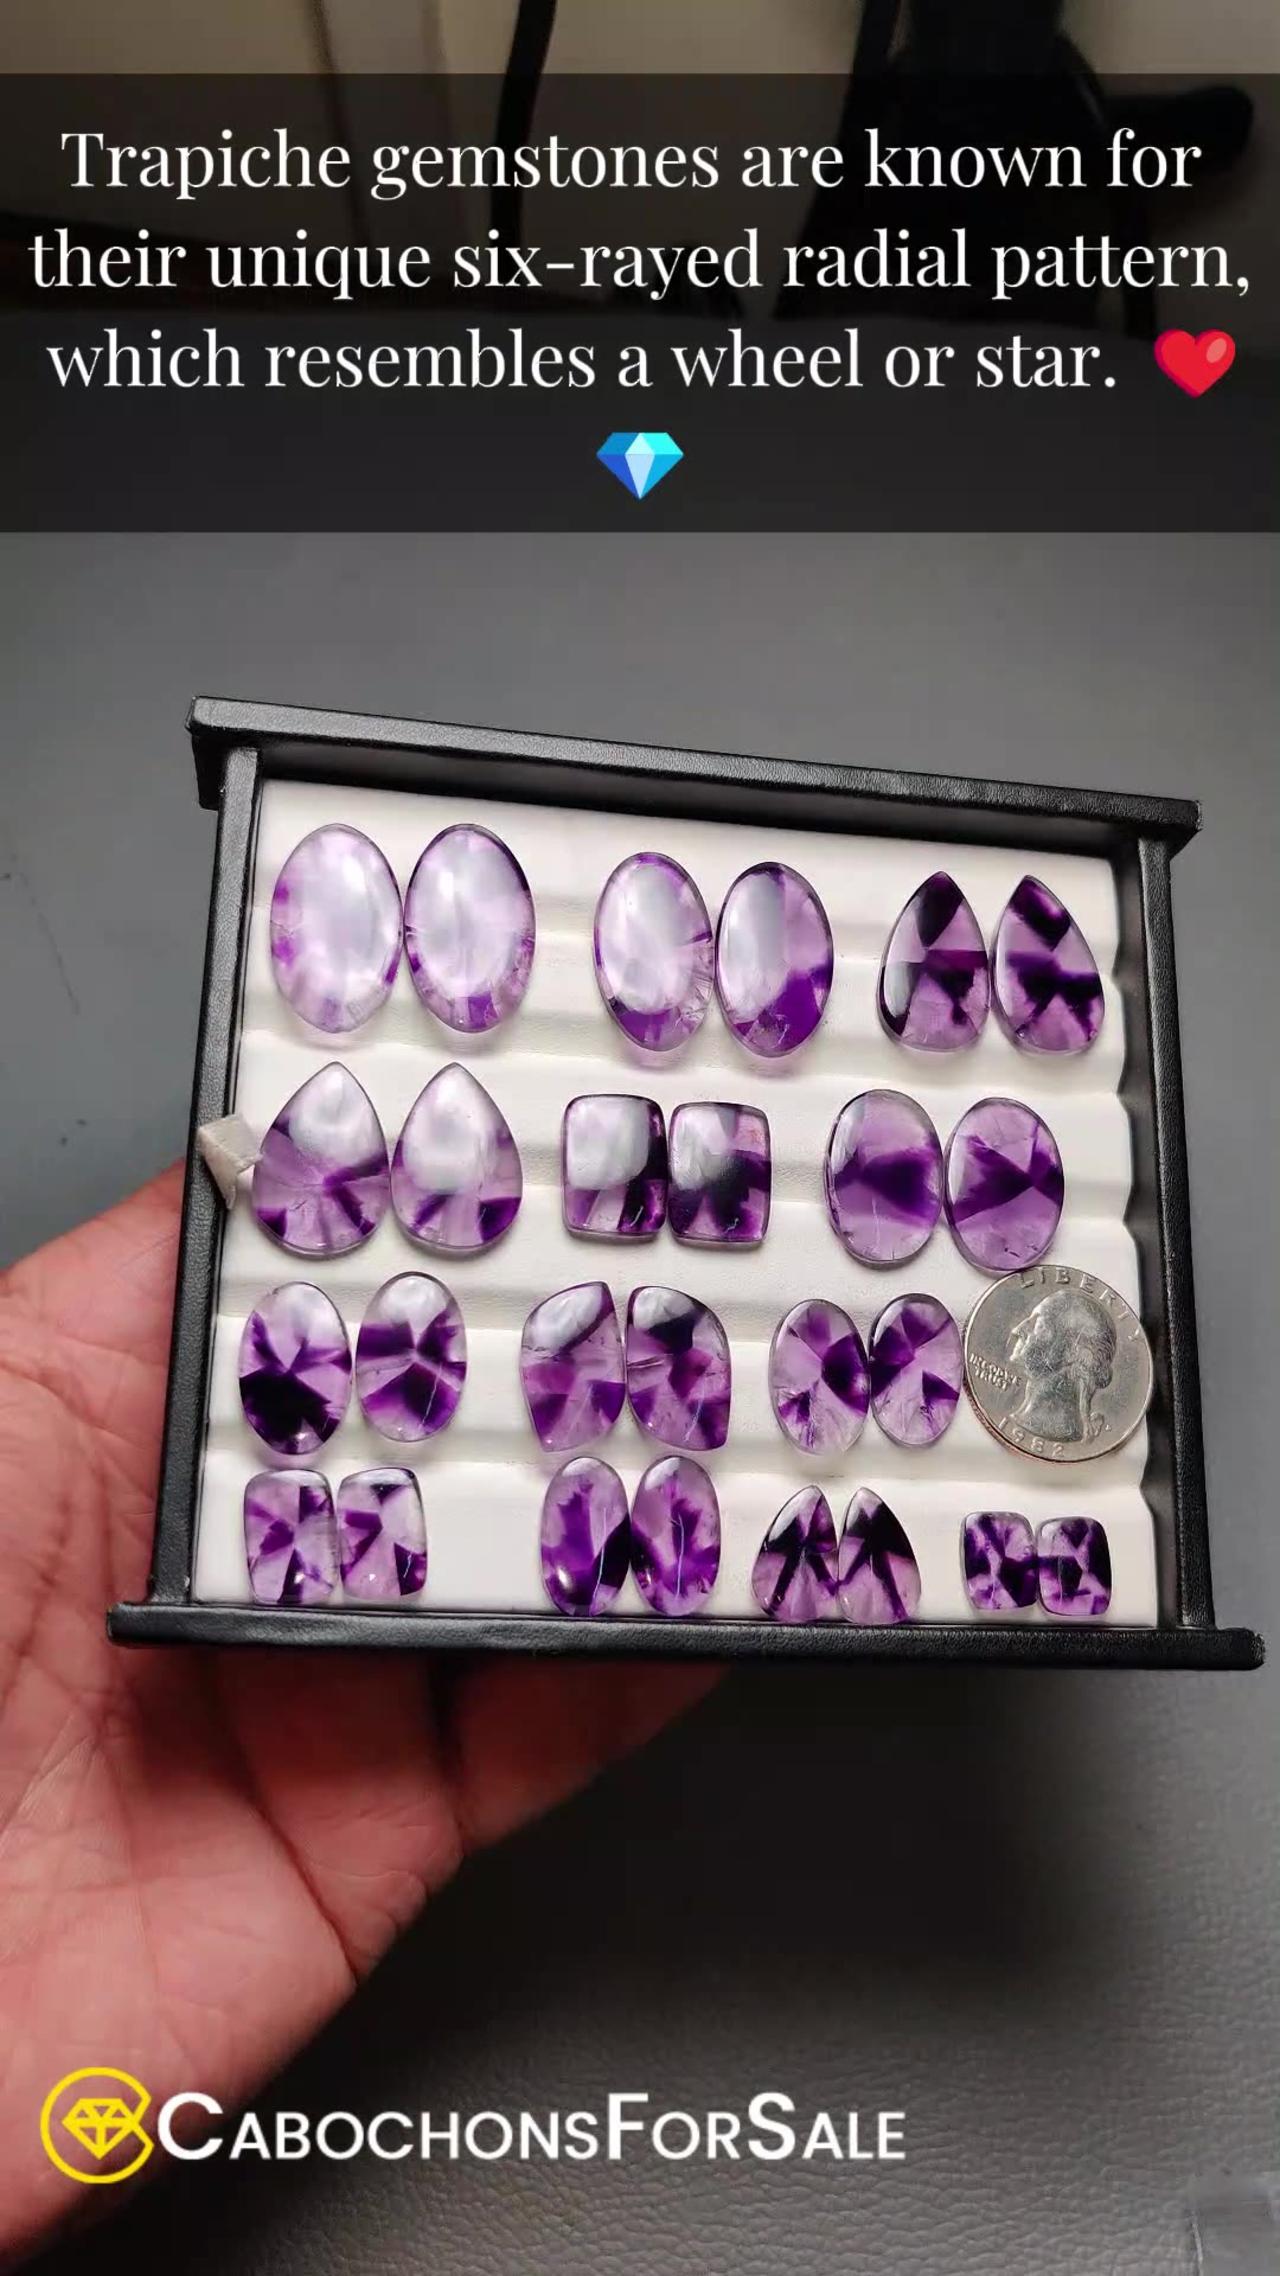 High-Quality Gemstone Cabochons at Best Price